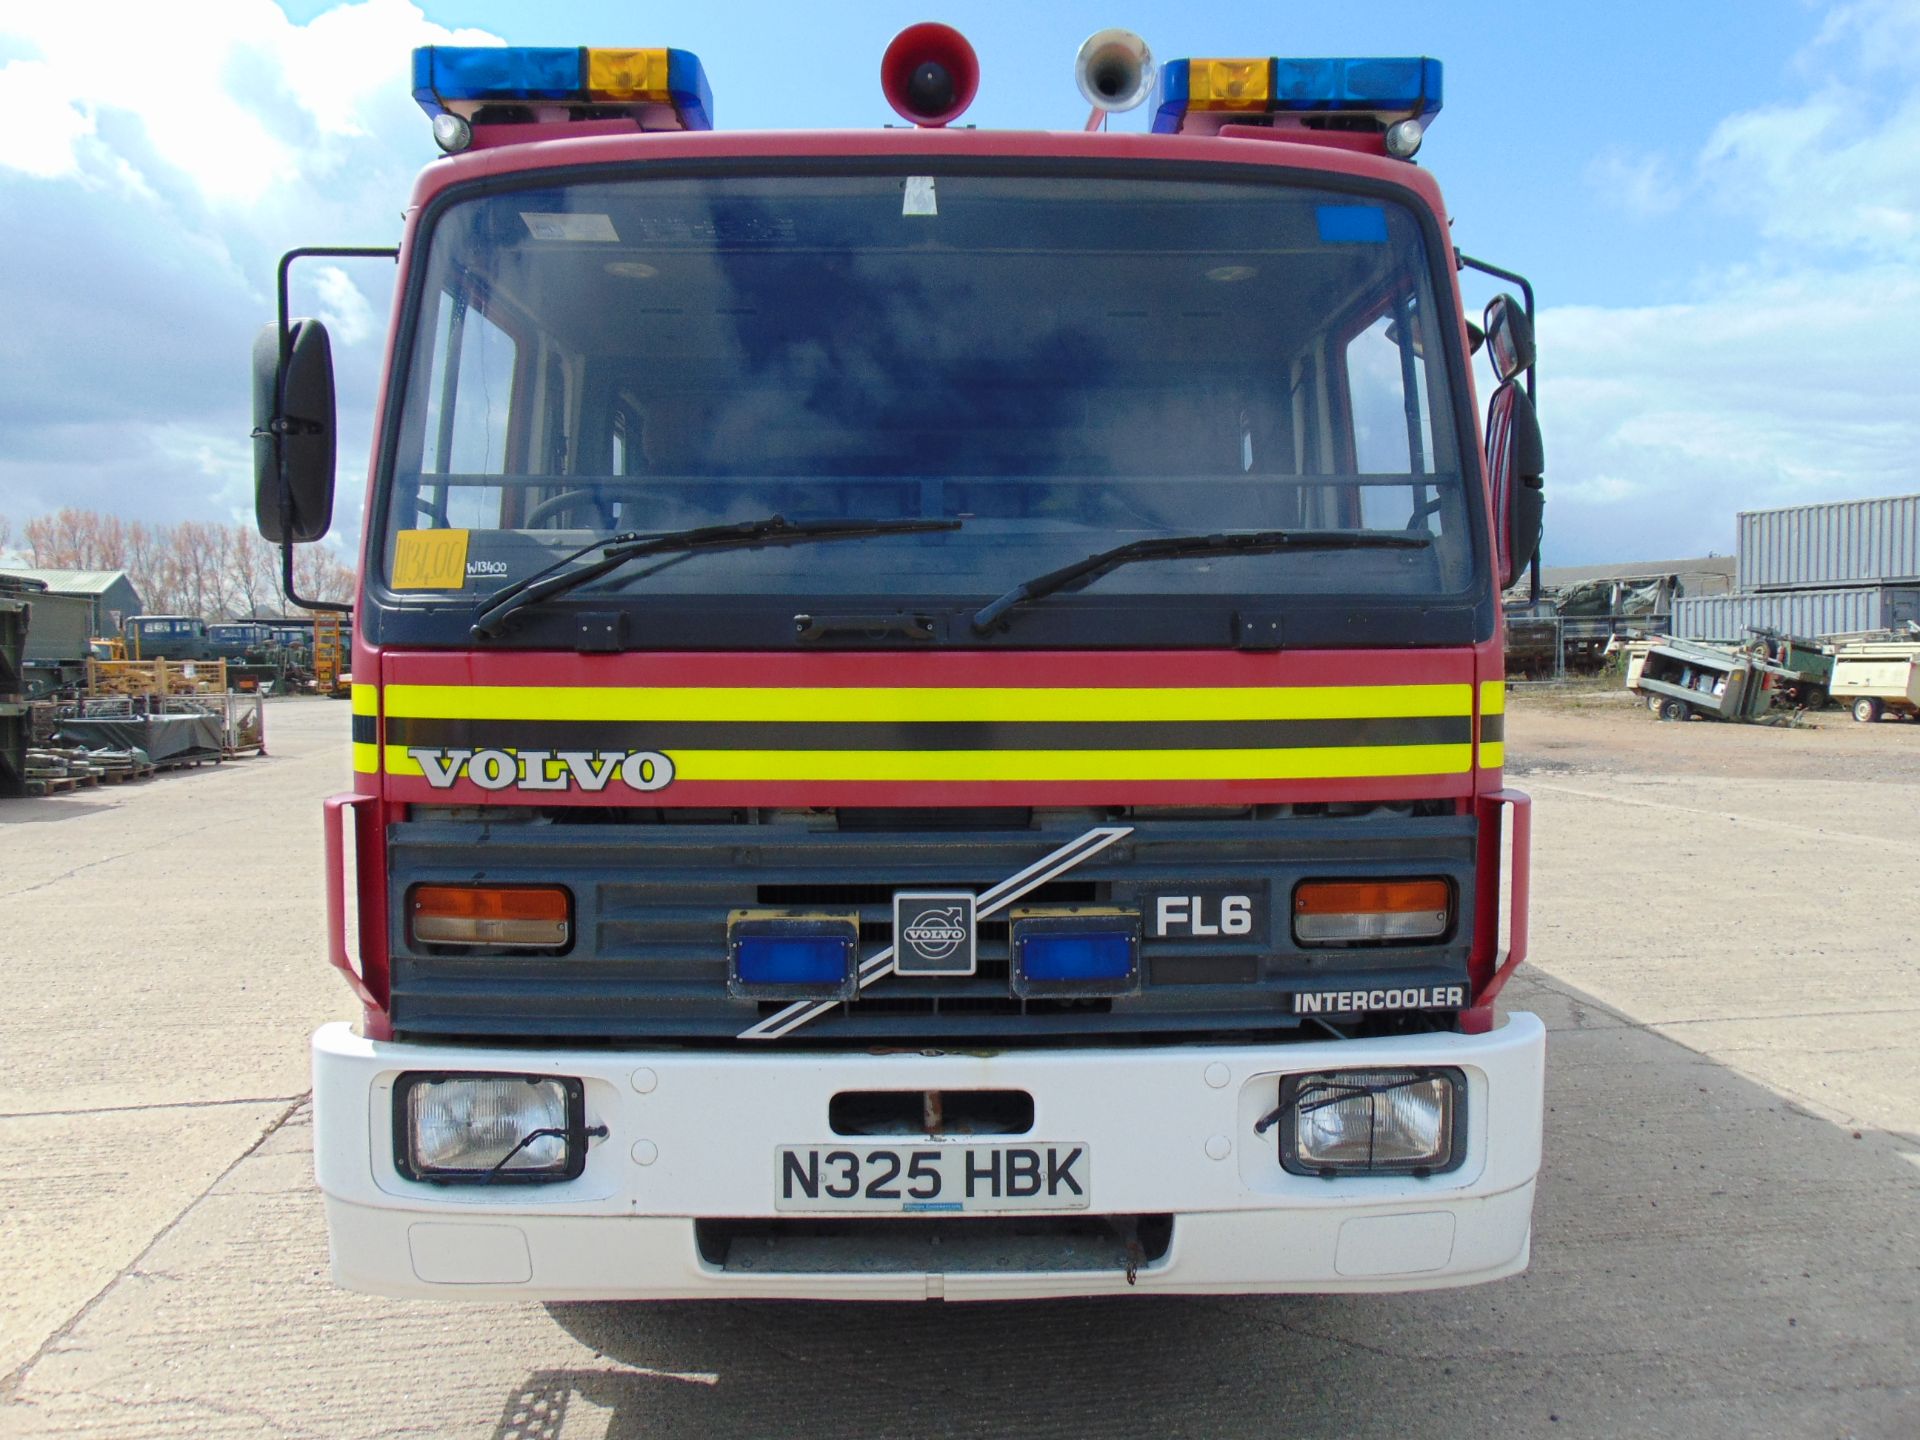 Volvo Saxon 4x2 Fire Engine ONLY 57,278 Miles - Image 3 of 31